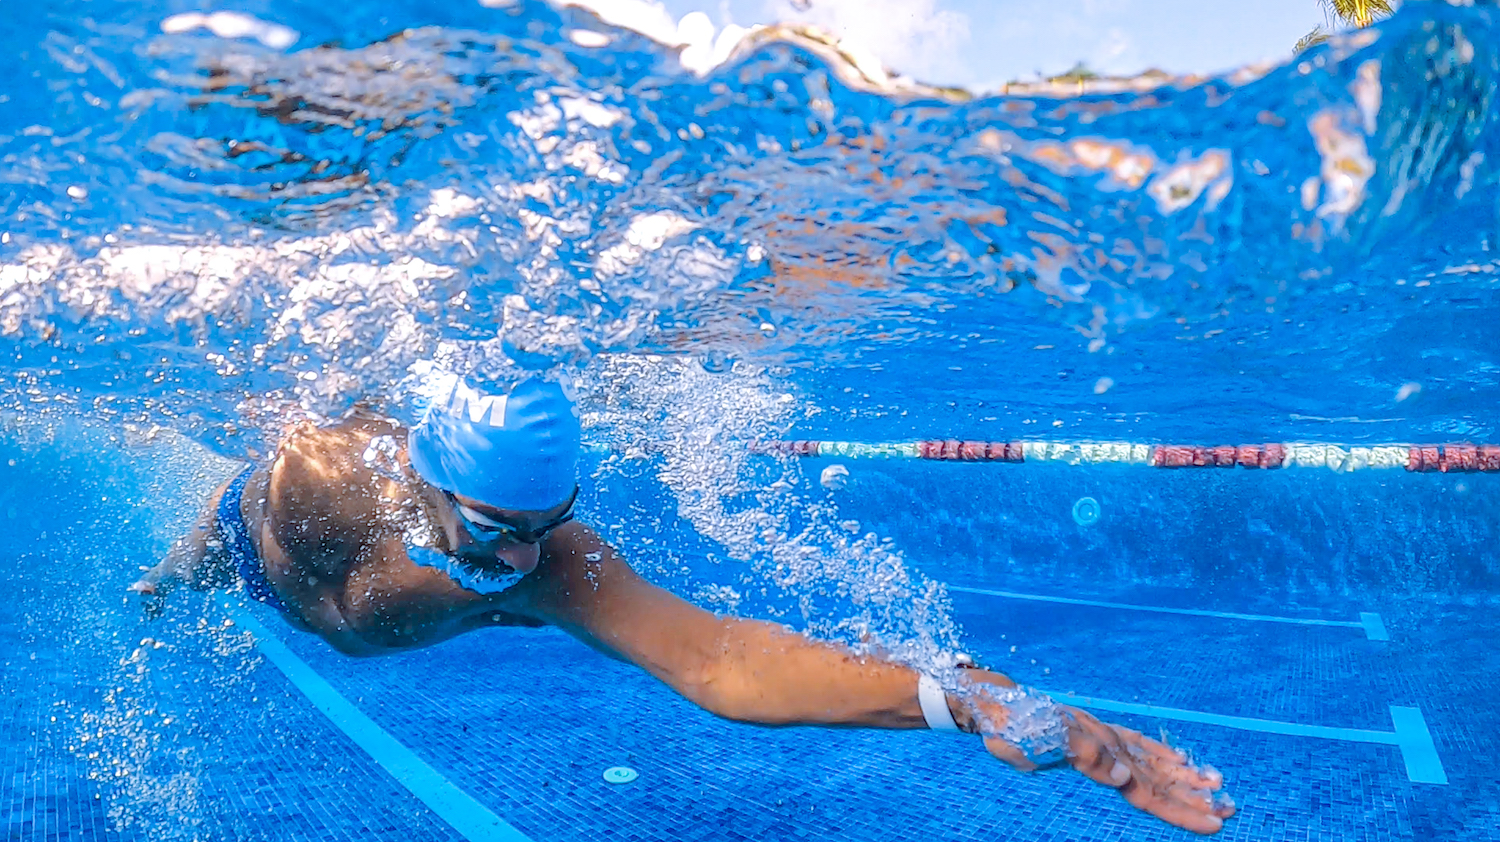 Olympian Swimming Skills: Five Ways to Improve Your Freestyle Form - stack